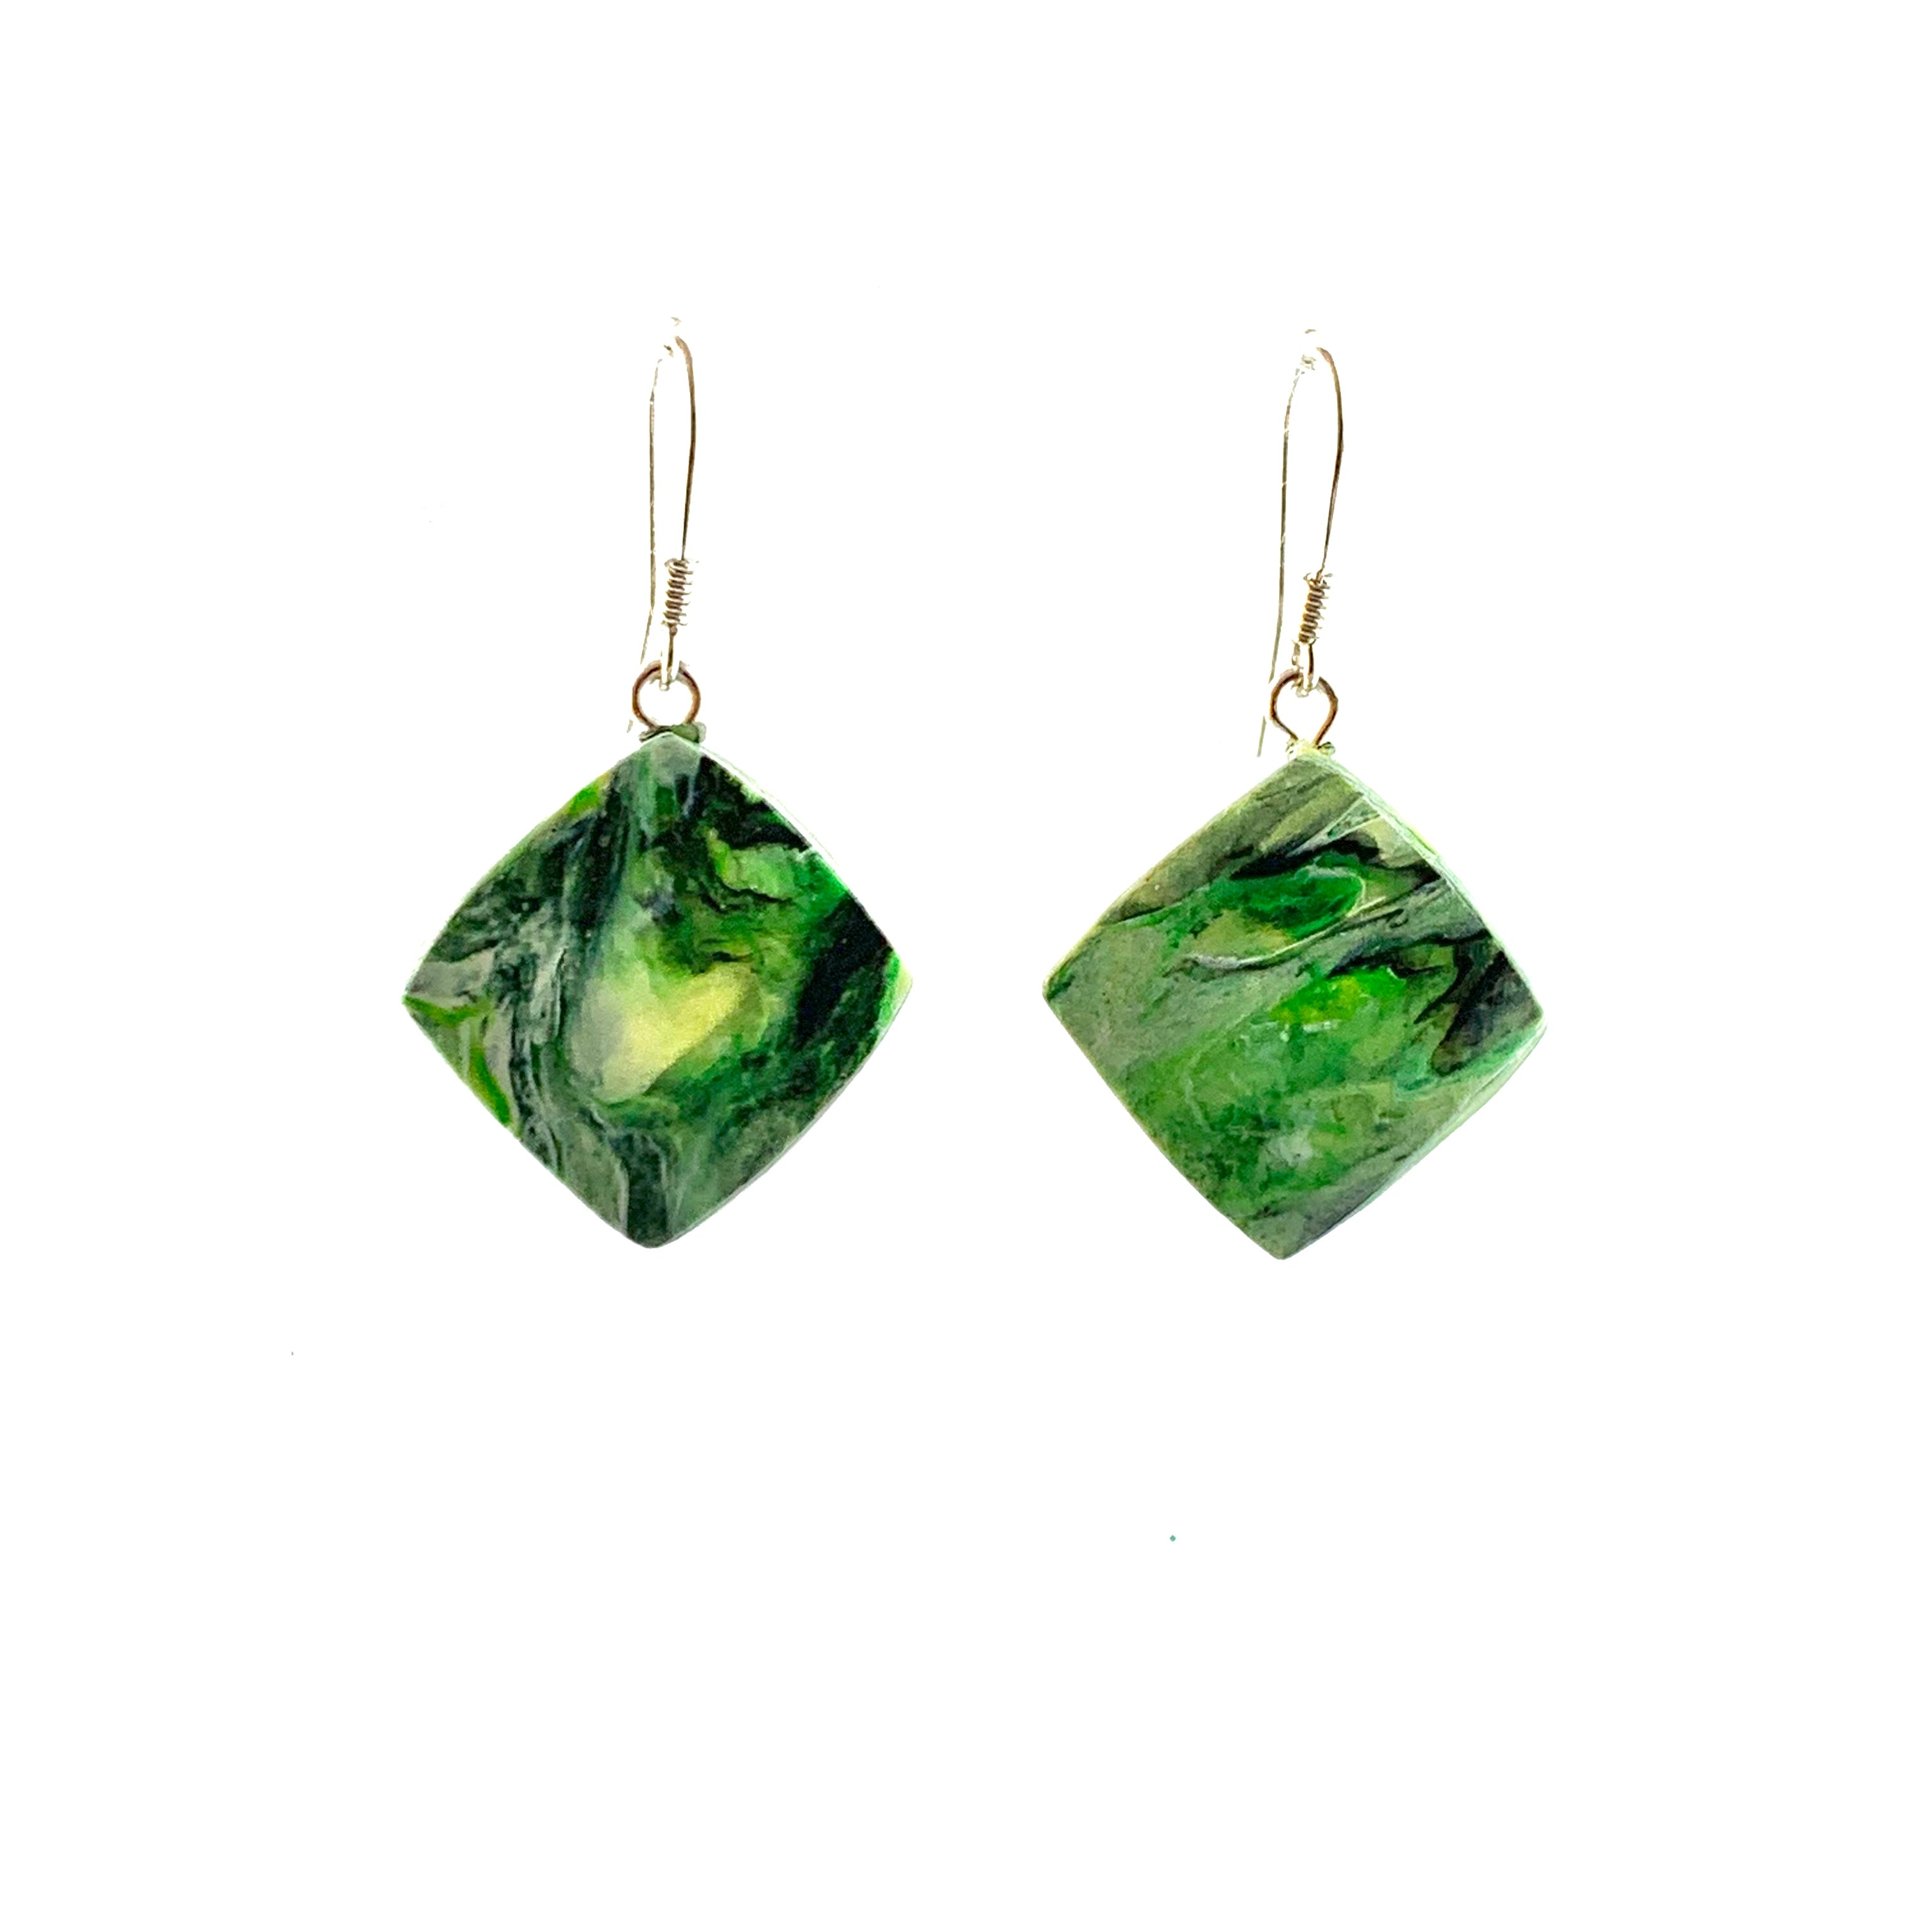 Green Dimond Dangle Earrings with Sterling Silver 925 fish hook